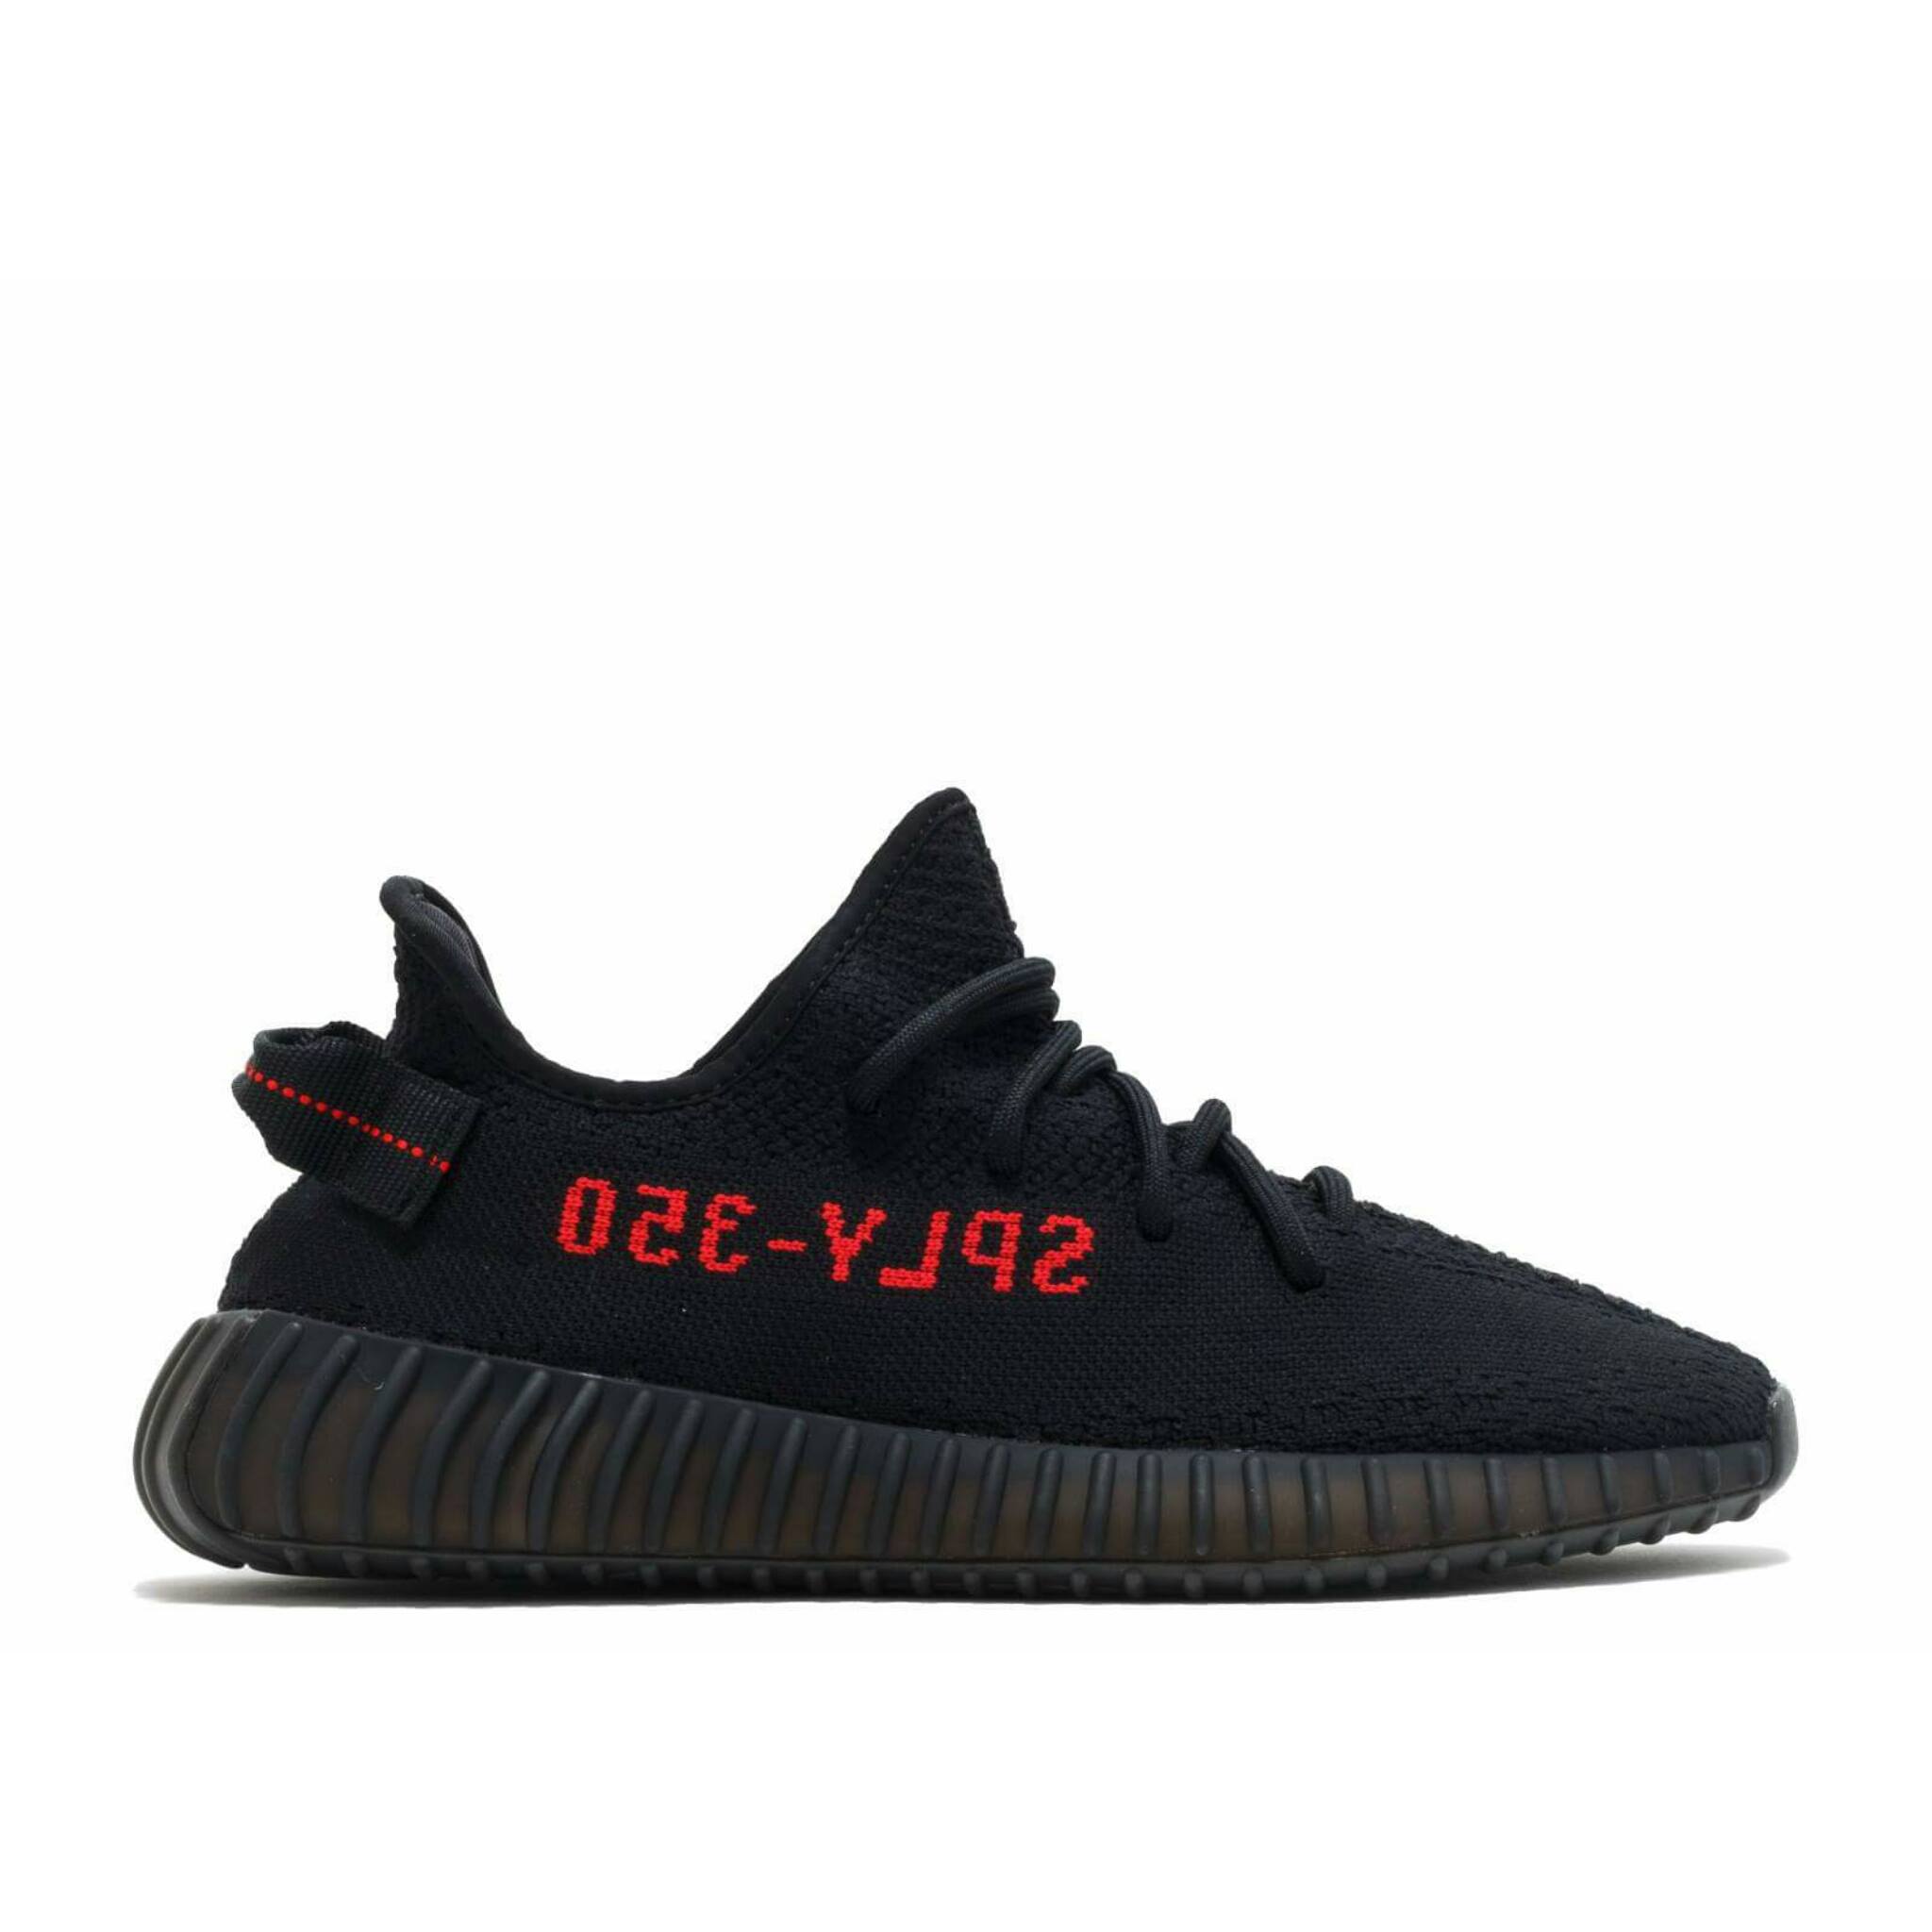 Buy Adidas Yeezy Boots 350 V2 BRED In 